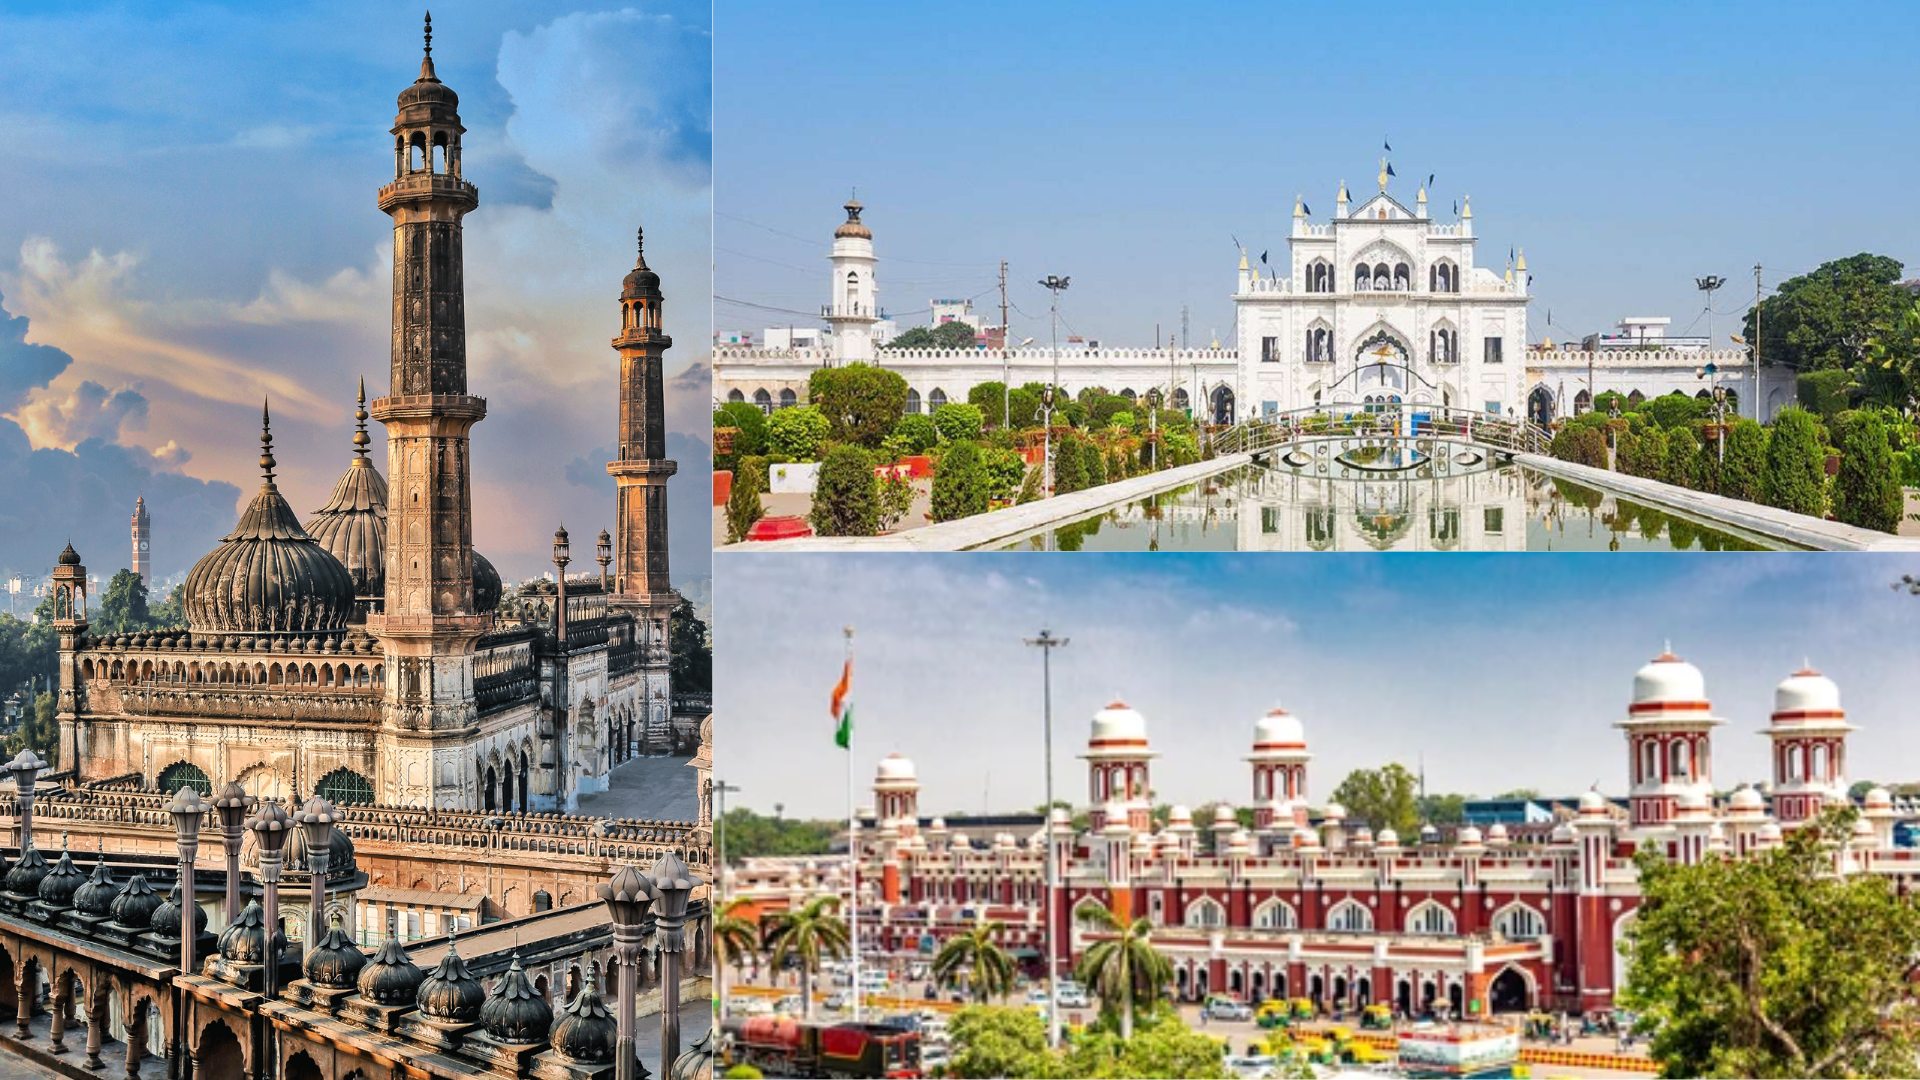 About and History of Lucknow